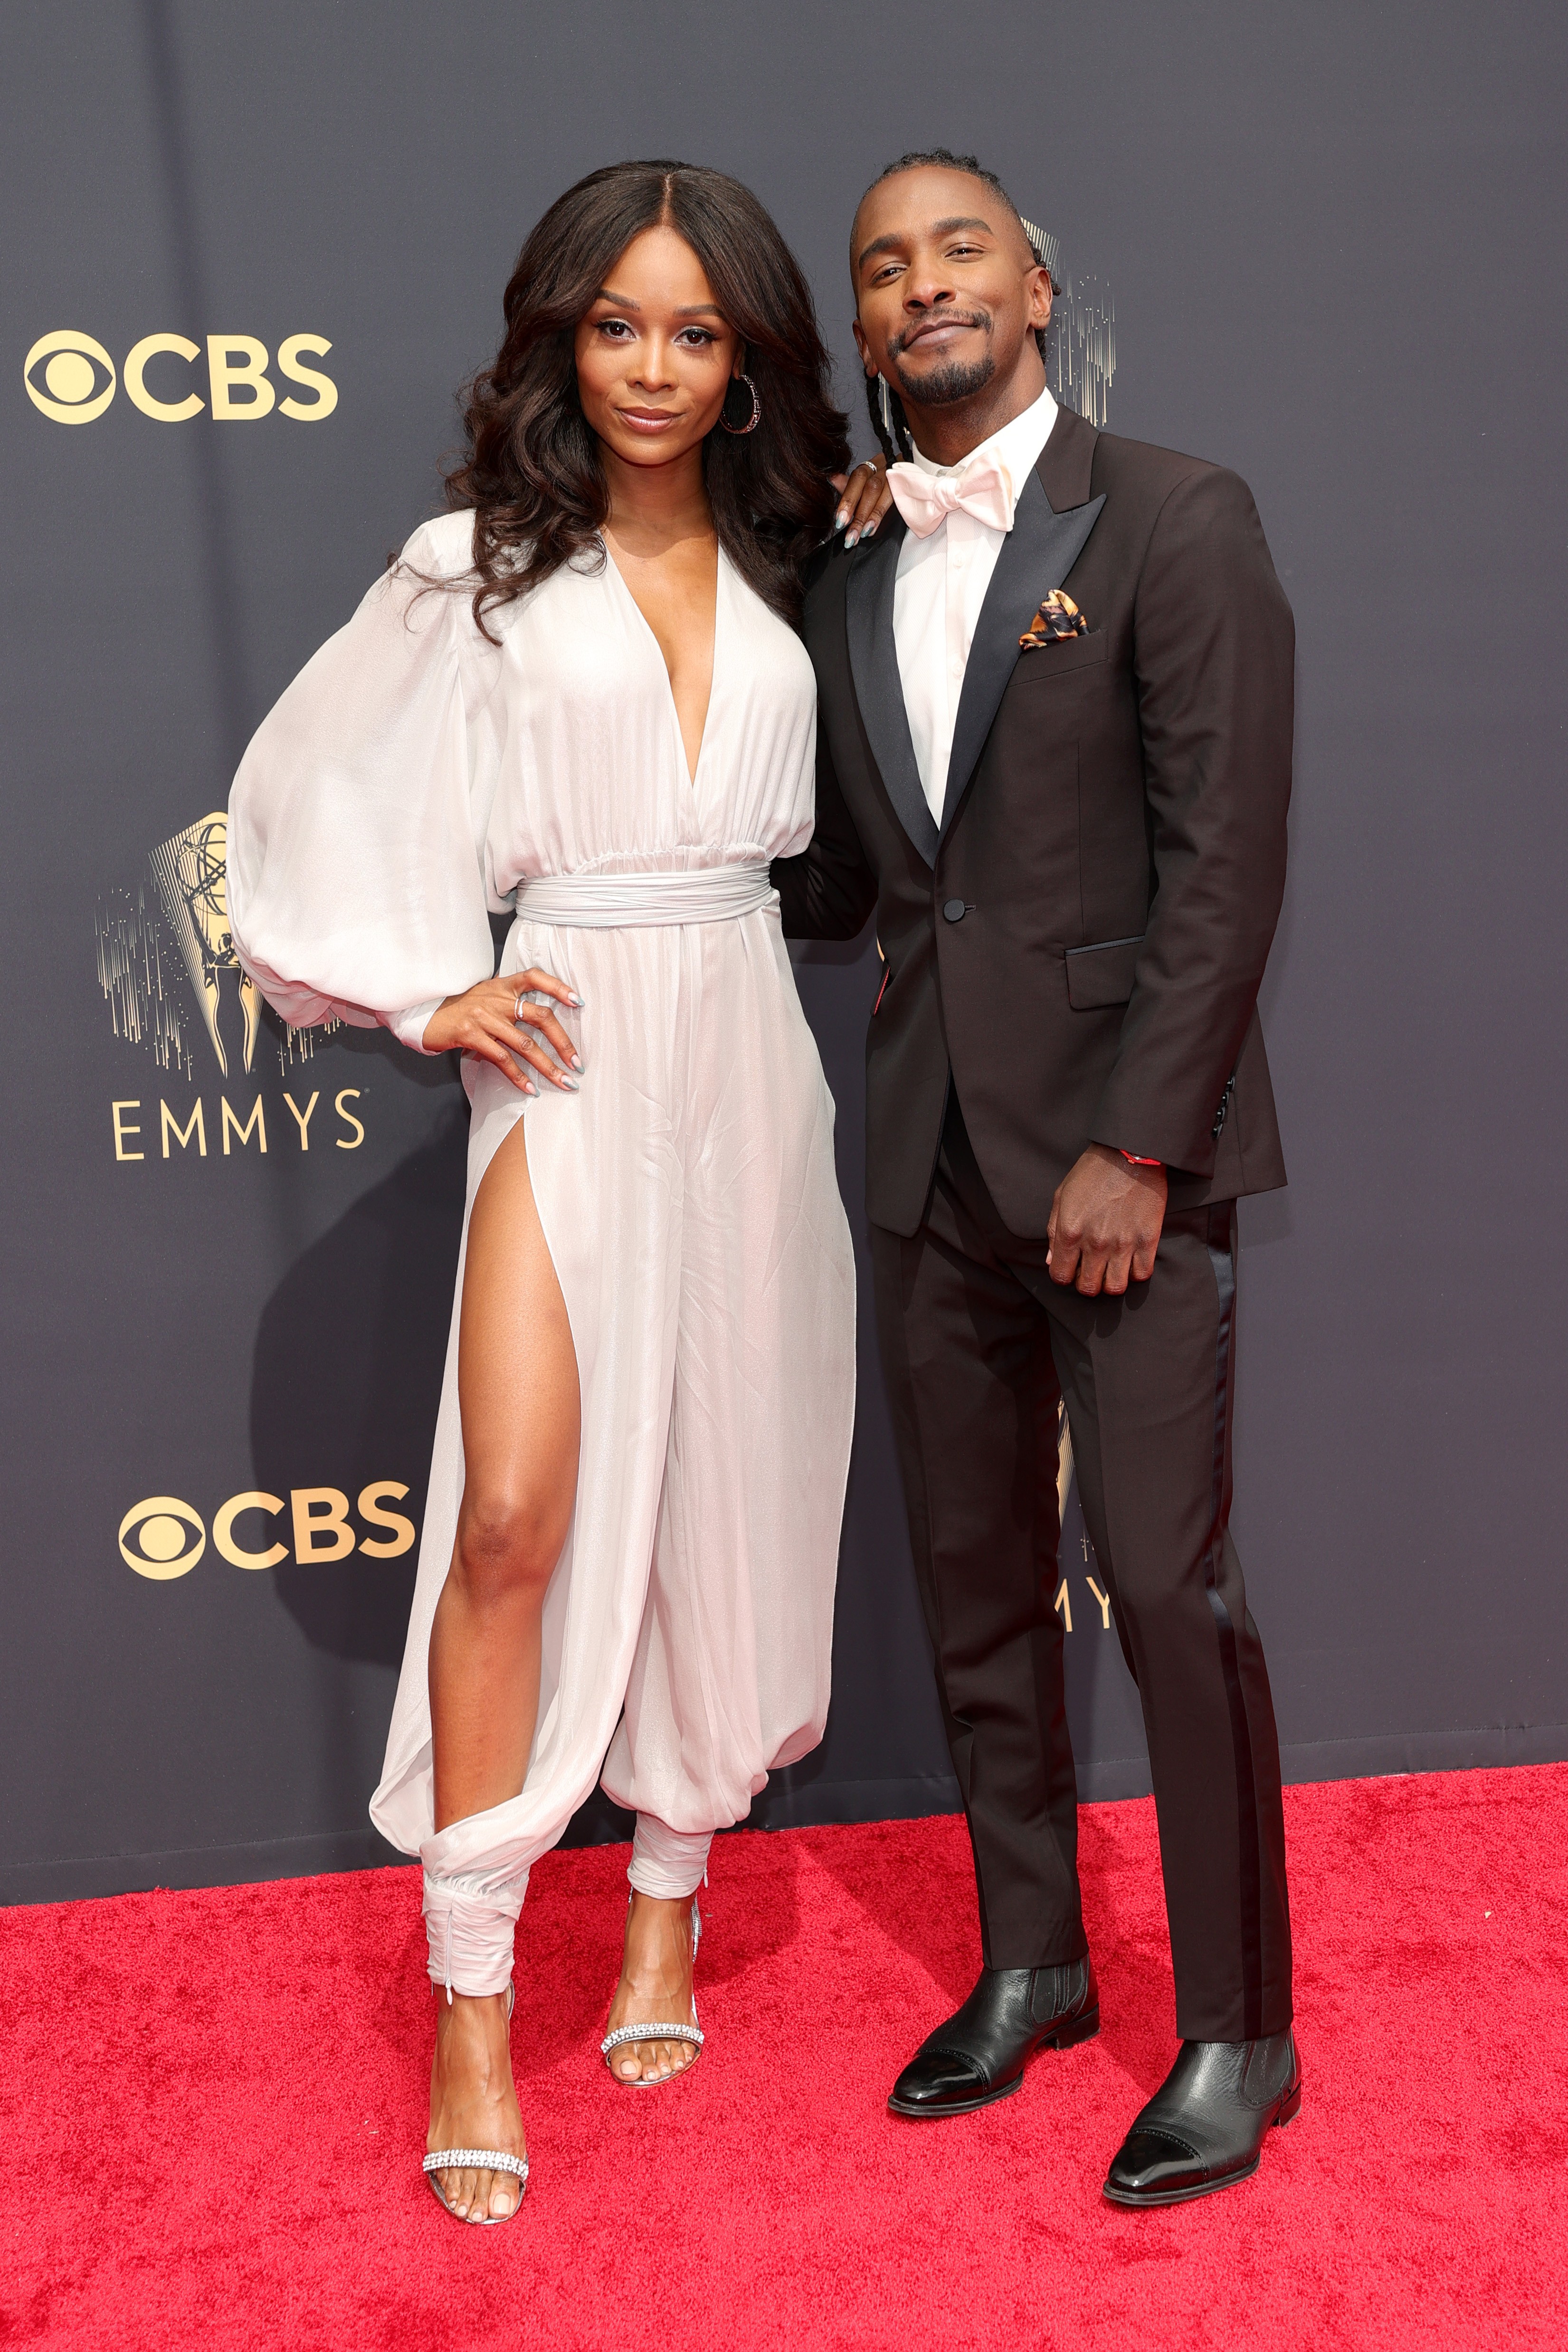 LOS ANGELES, CALIFORNIA - SEPTEMBER 19: (L-R) Zuri Hall and Scott Evans attend the 73rd Primetime Emmy Awards at L.A. LIVE on September 19, 2021 in Los Angeles, California. (Photo by Rich Fury/Getty Images) (Foto: Getty Images)